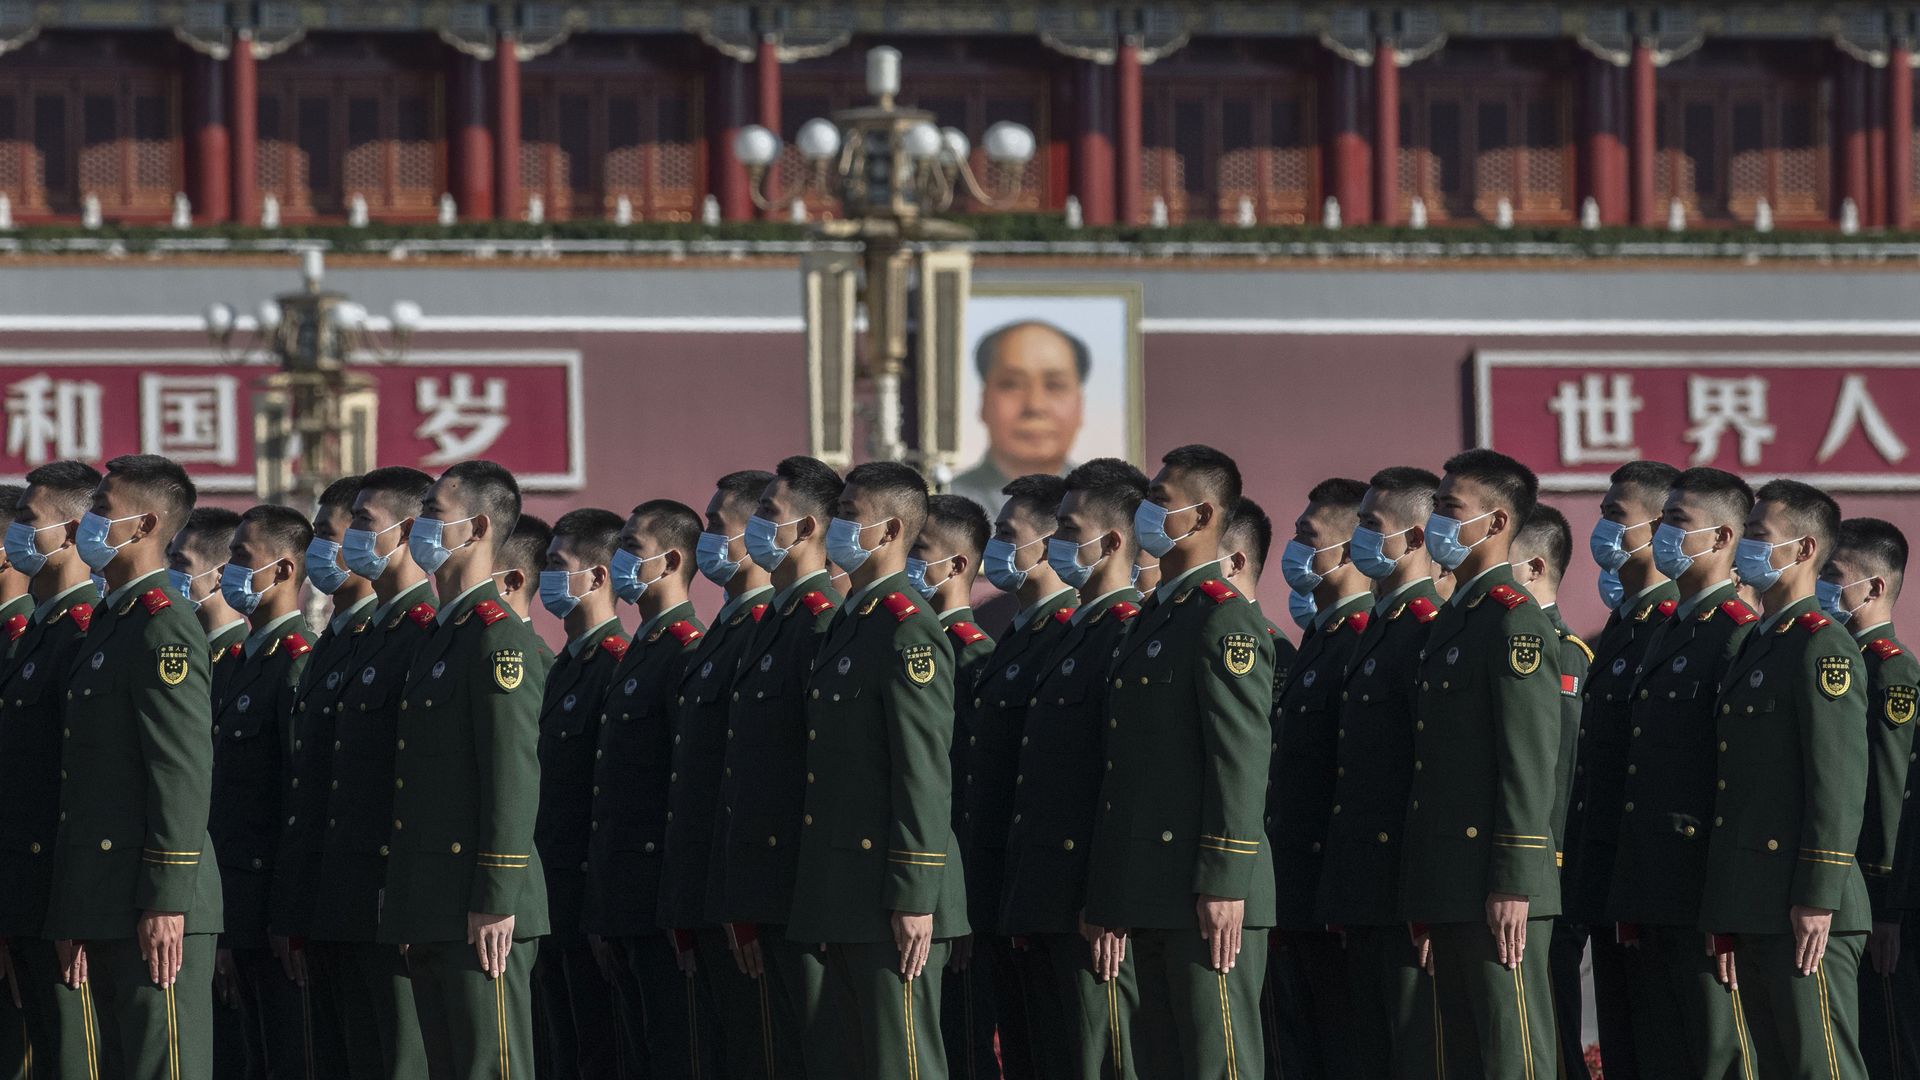 Photo of the People's Liberation Army lining up in Tiananmen Square